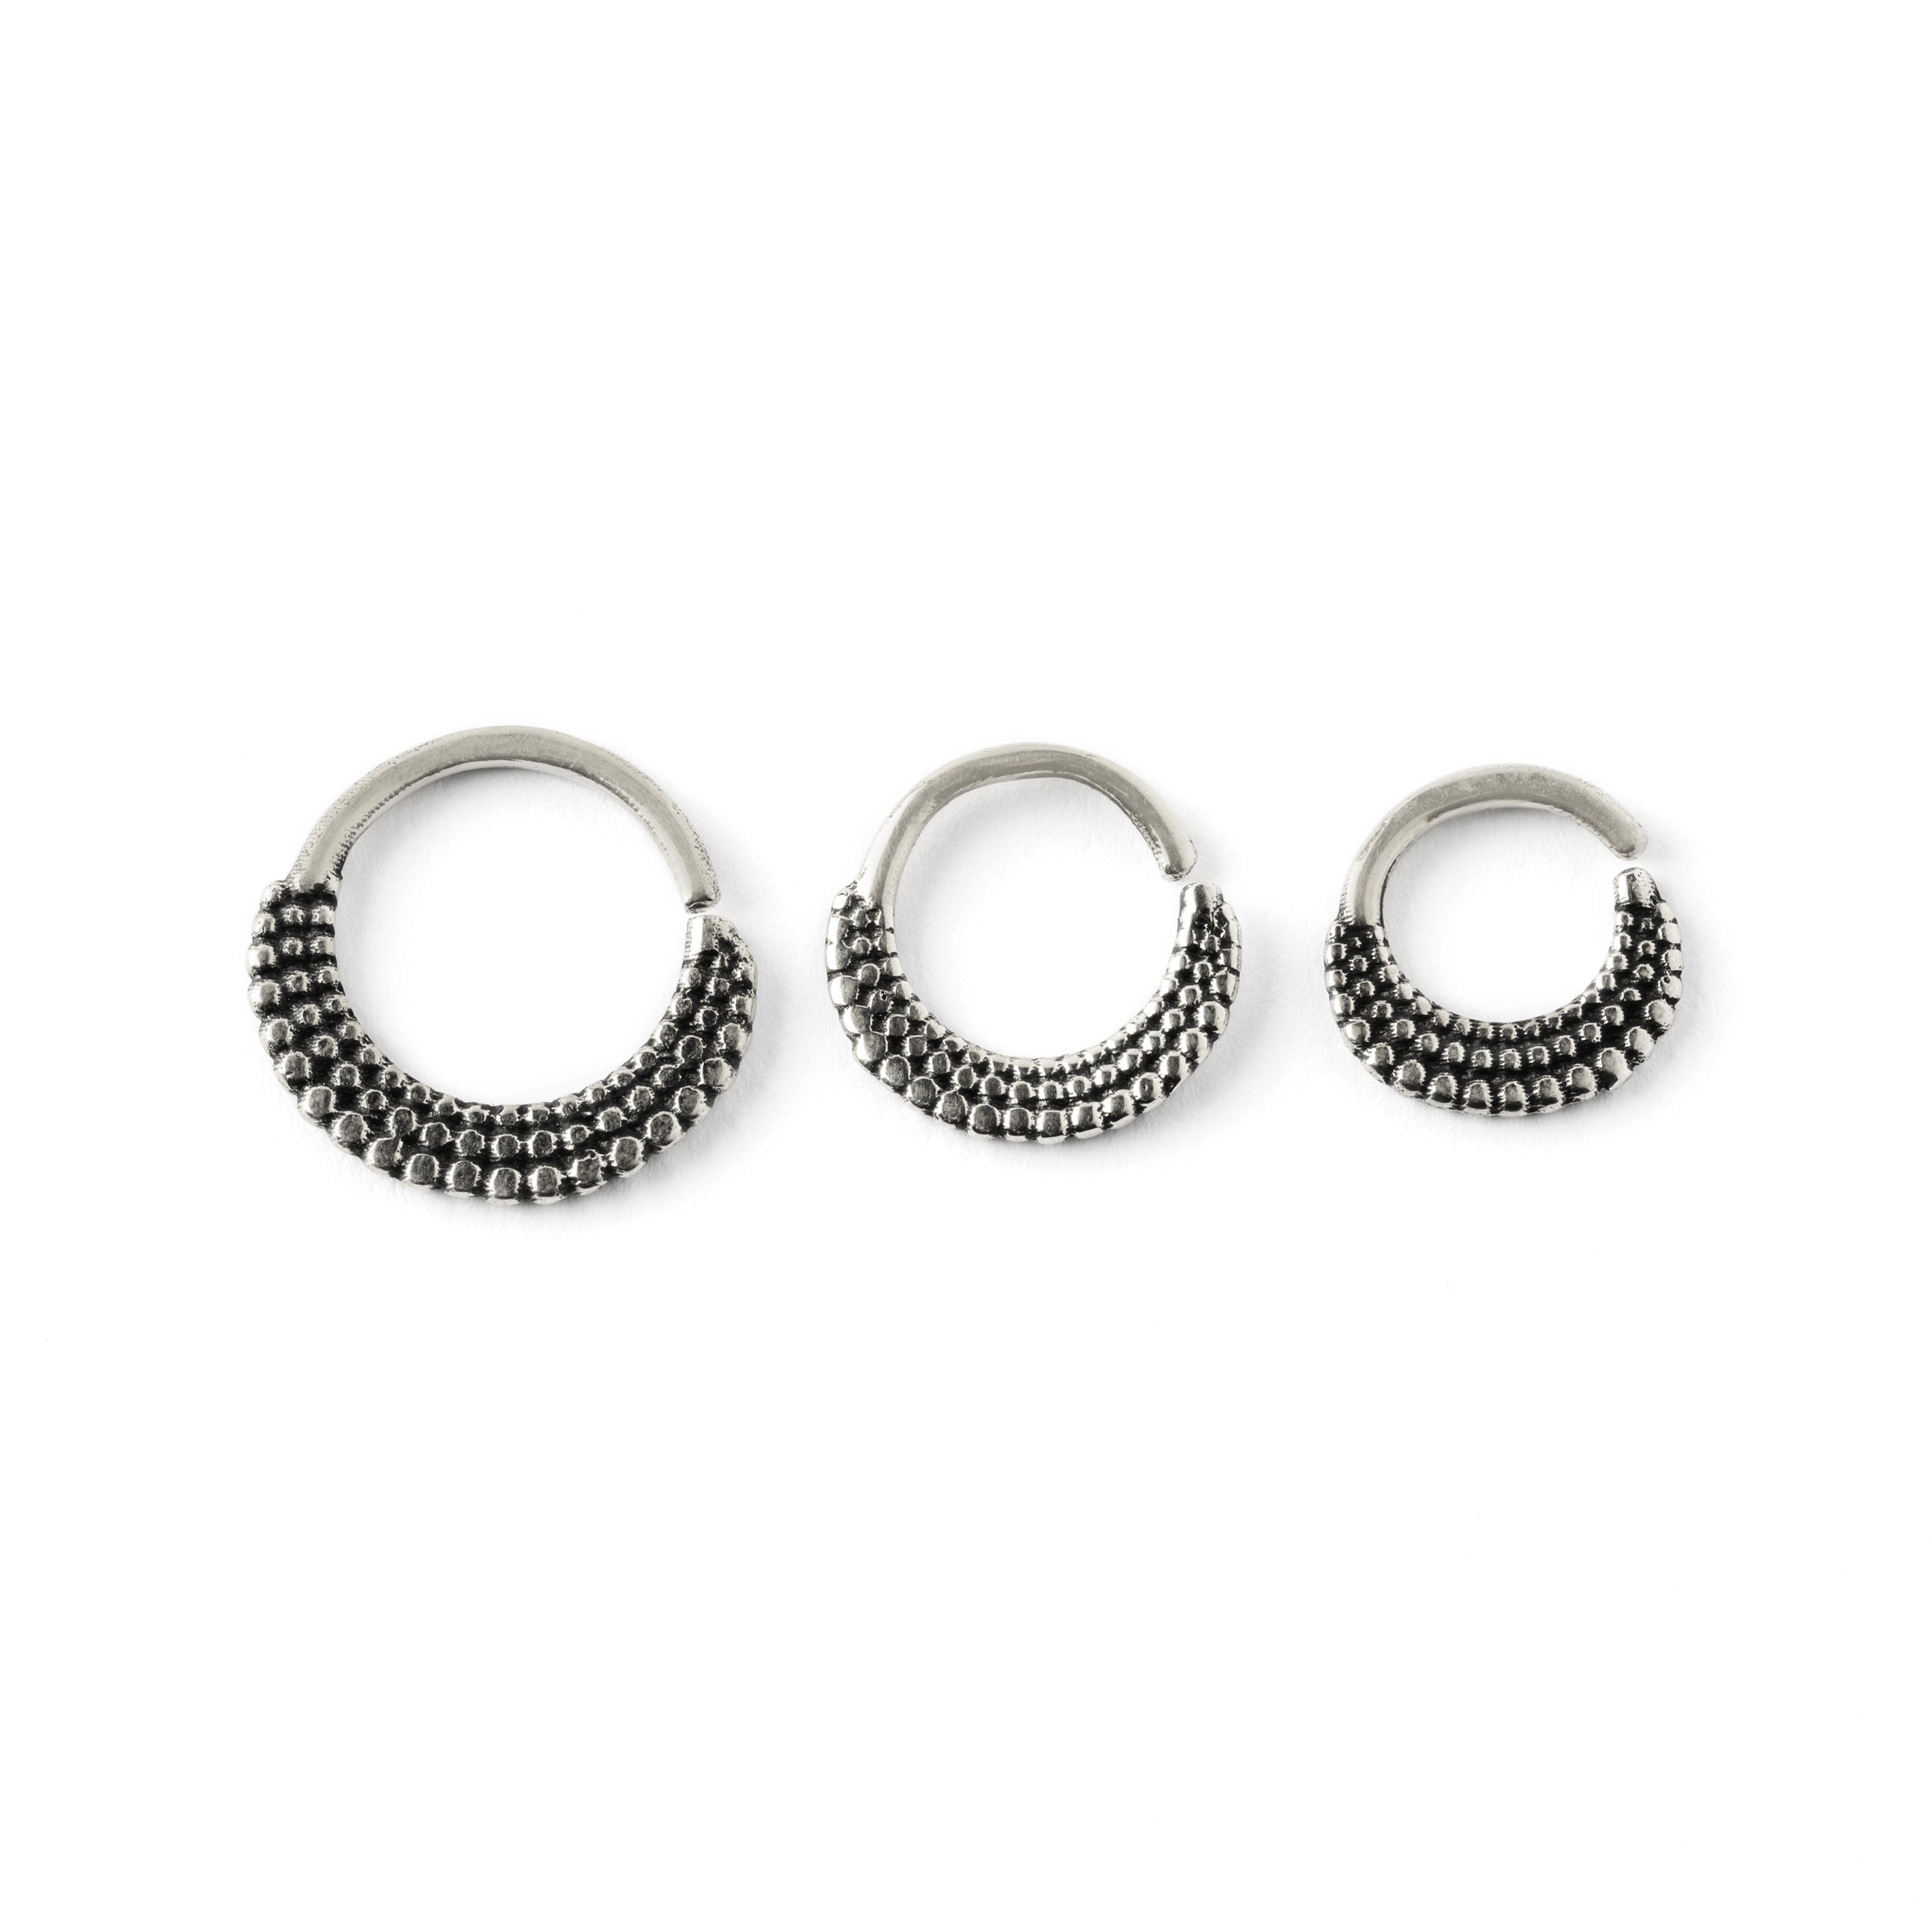 6mm, 8mm, 10mm Ameya silver septum rings frontal view